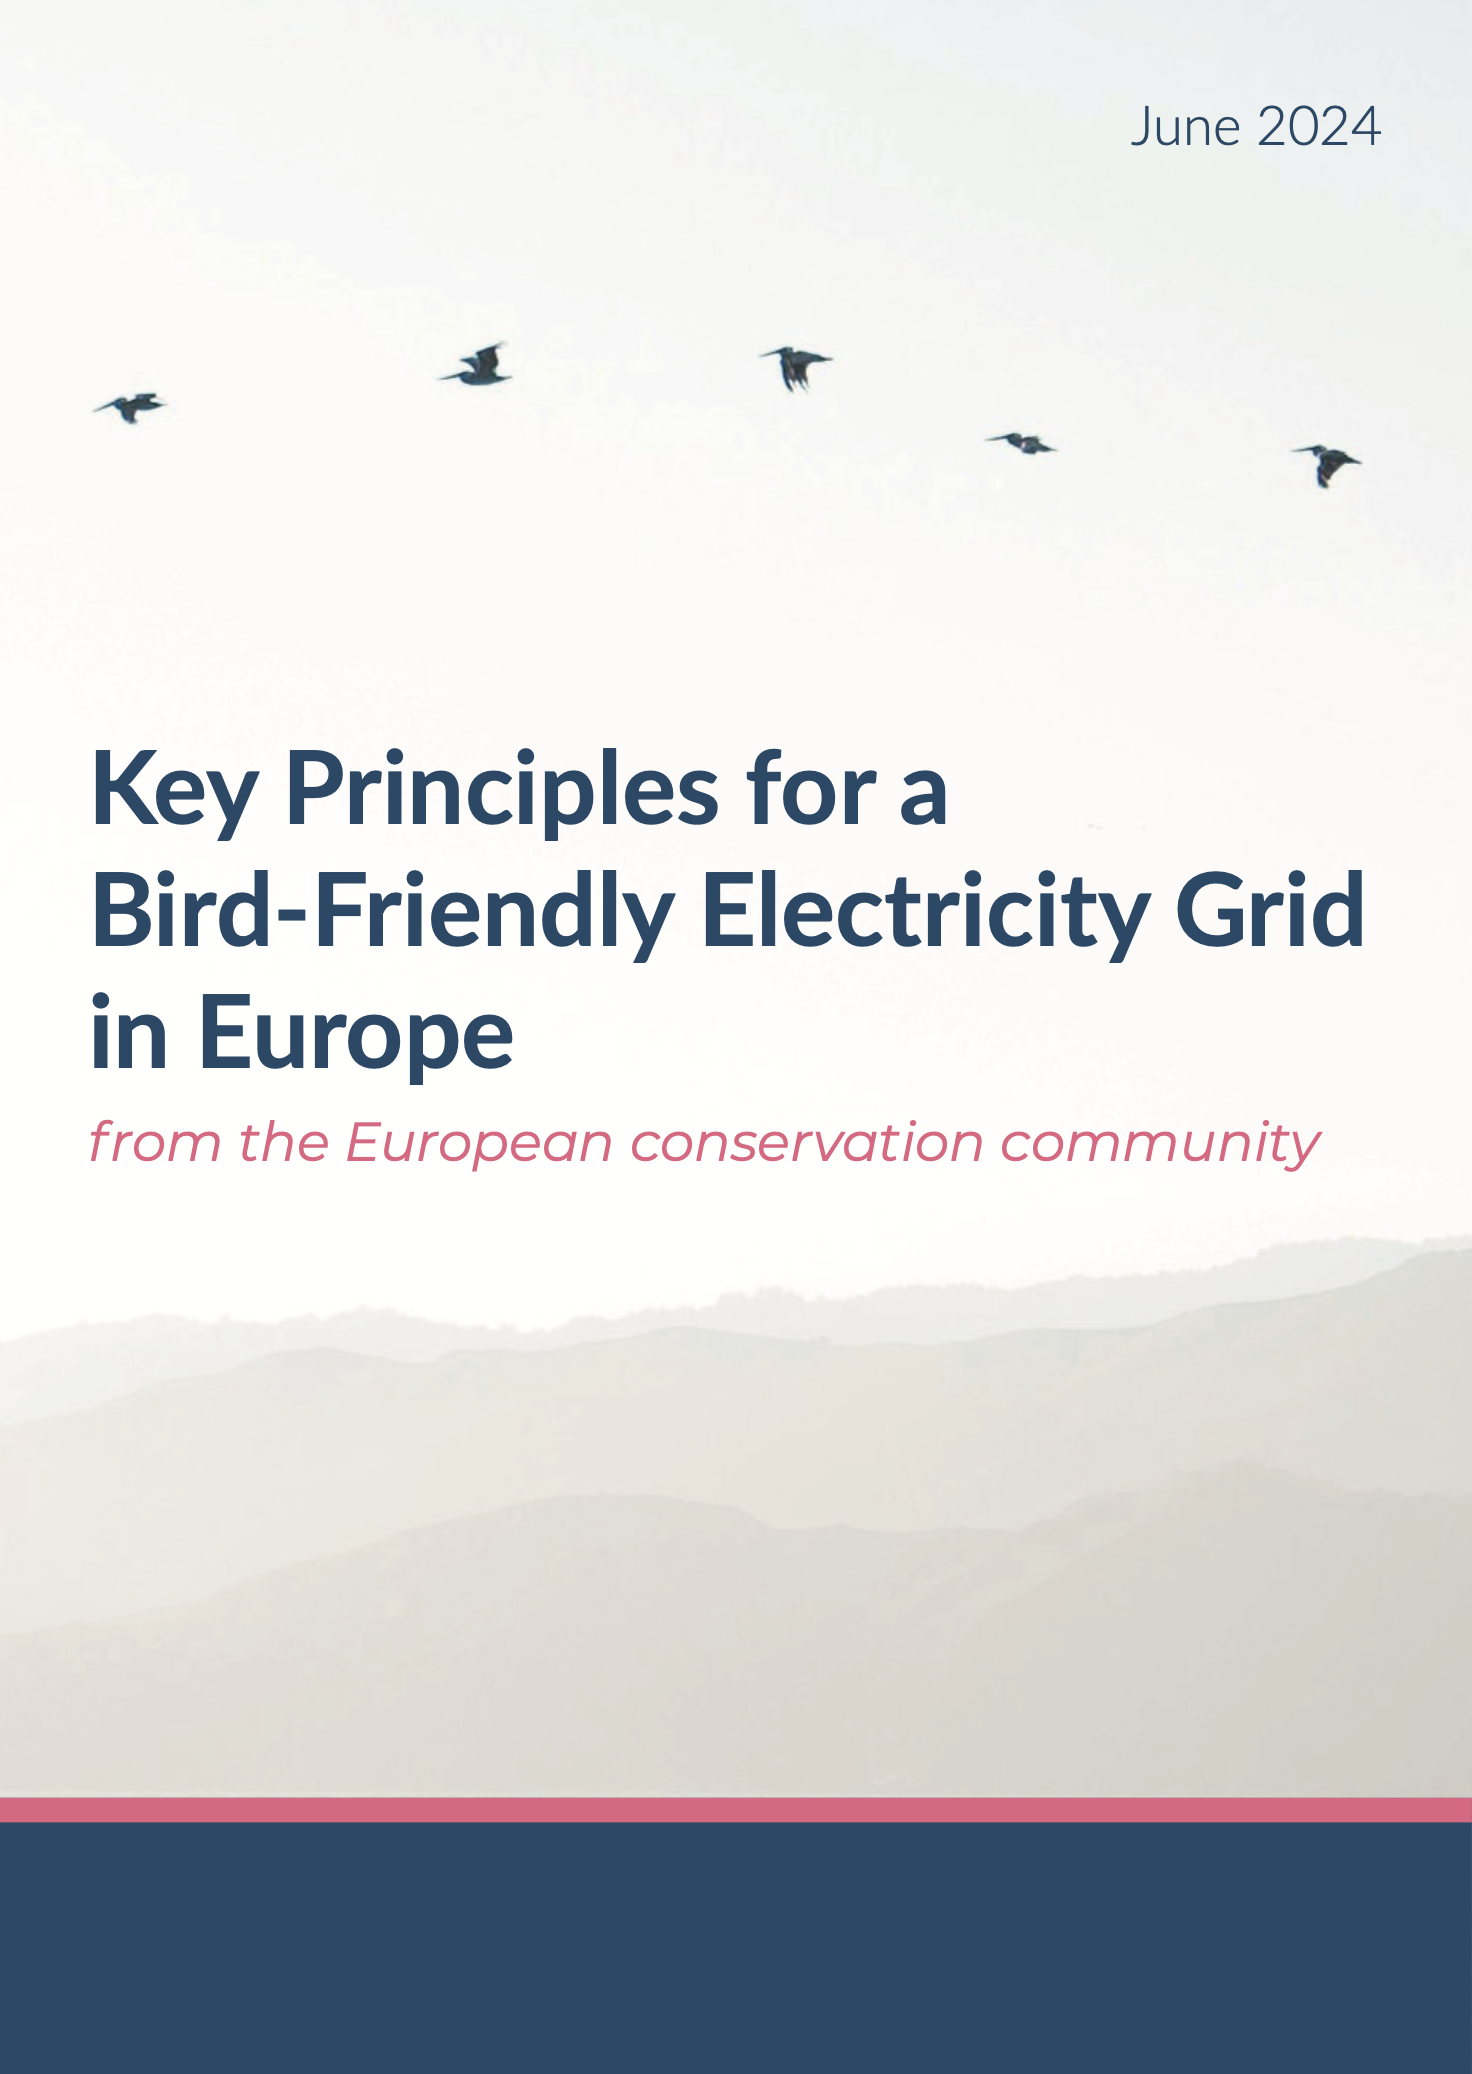 Key Principles for a Bird-Friendly Electricity Grid in Europe